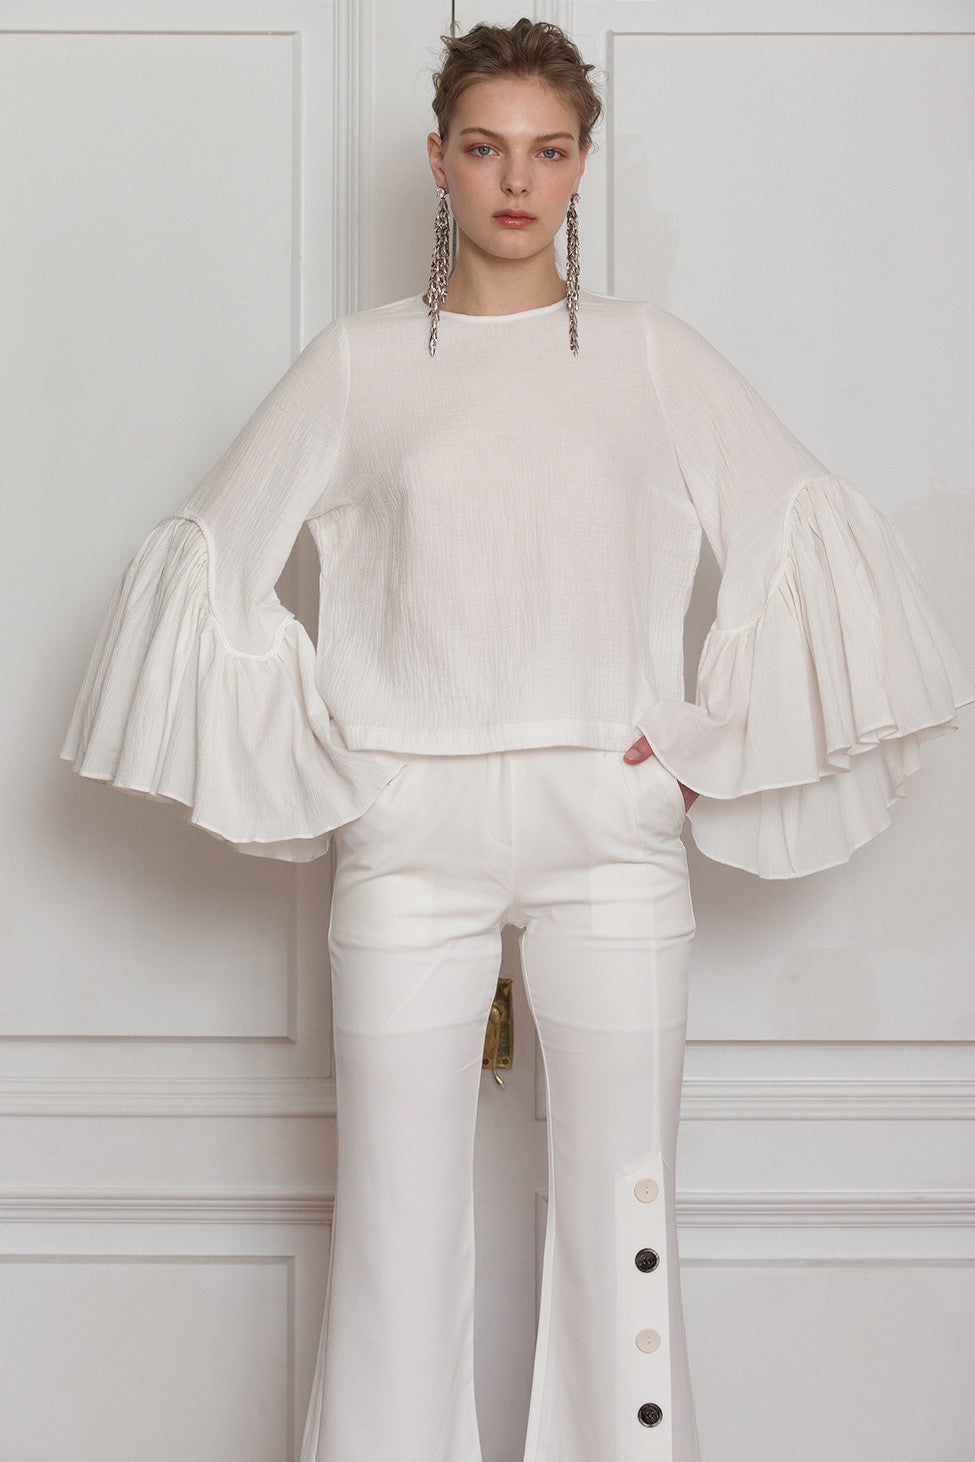 The Kahena Top in White featuring round neckline, gathered ruched bell sleeves with concealed zip closure at back. Dropped shoulder.